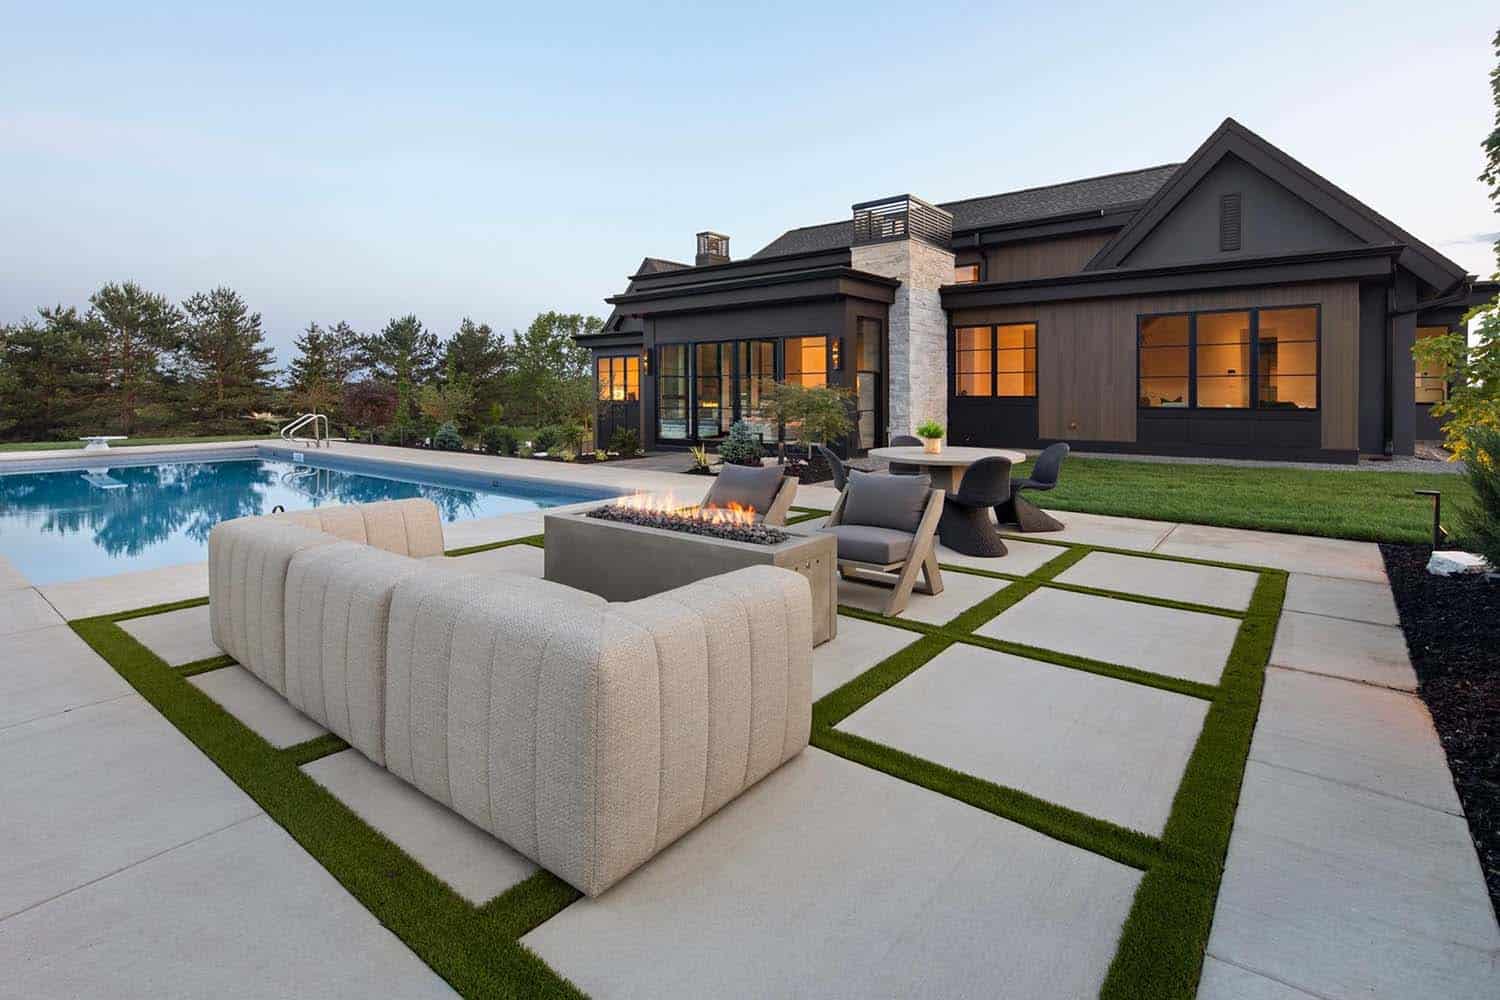 modern rambler home patio with outdoor furniture at dusk